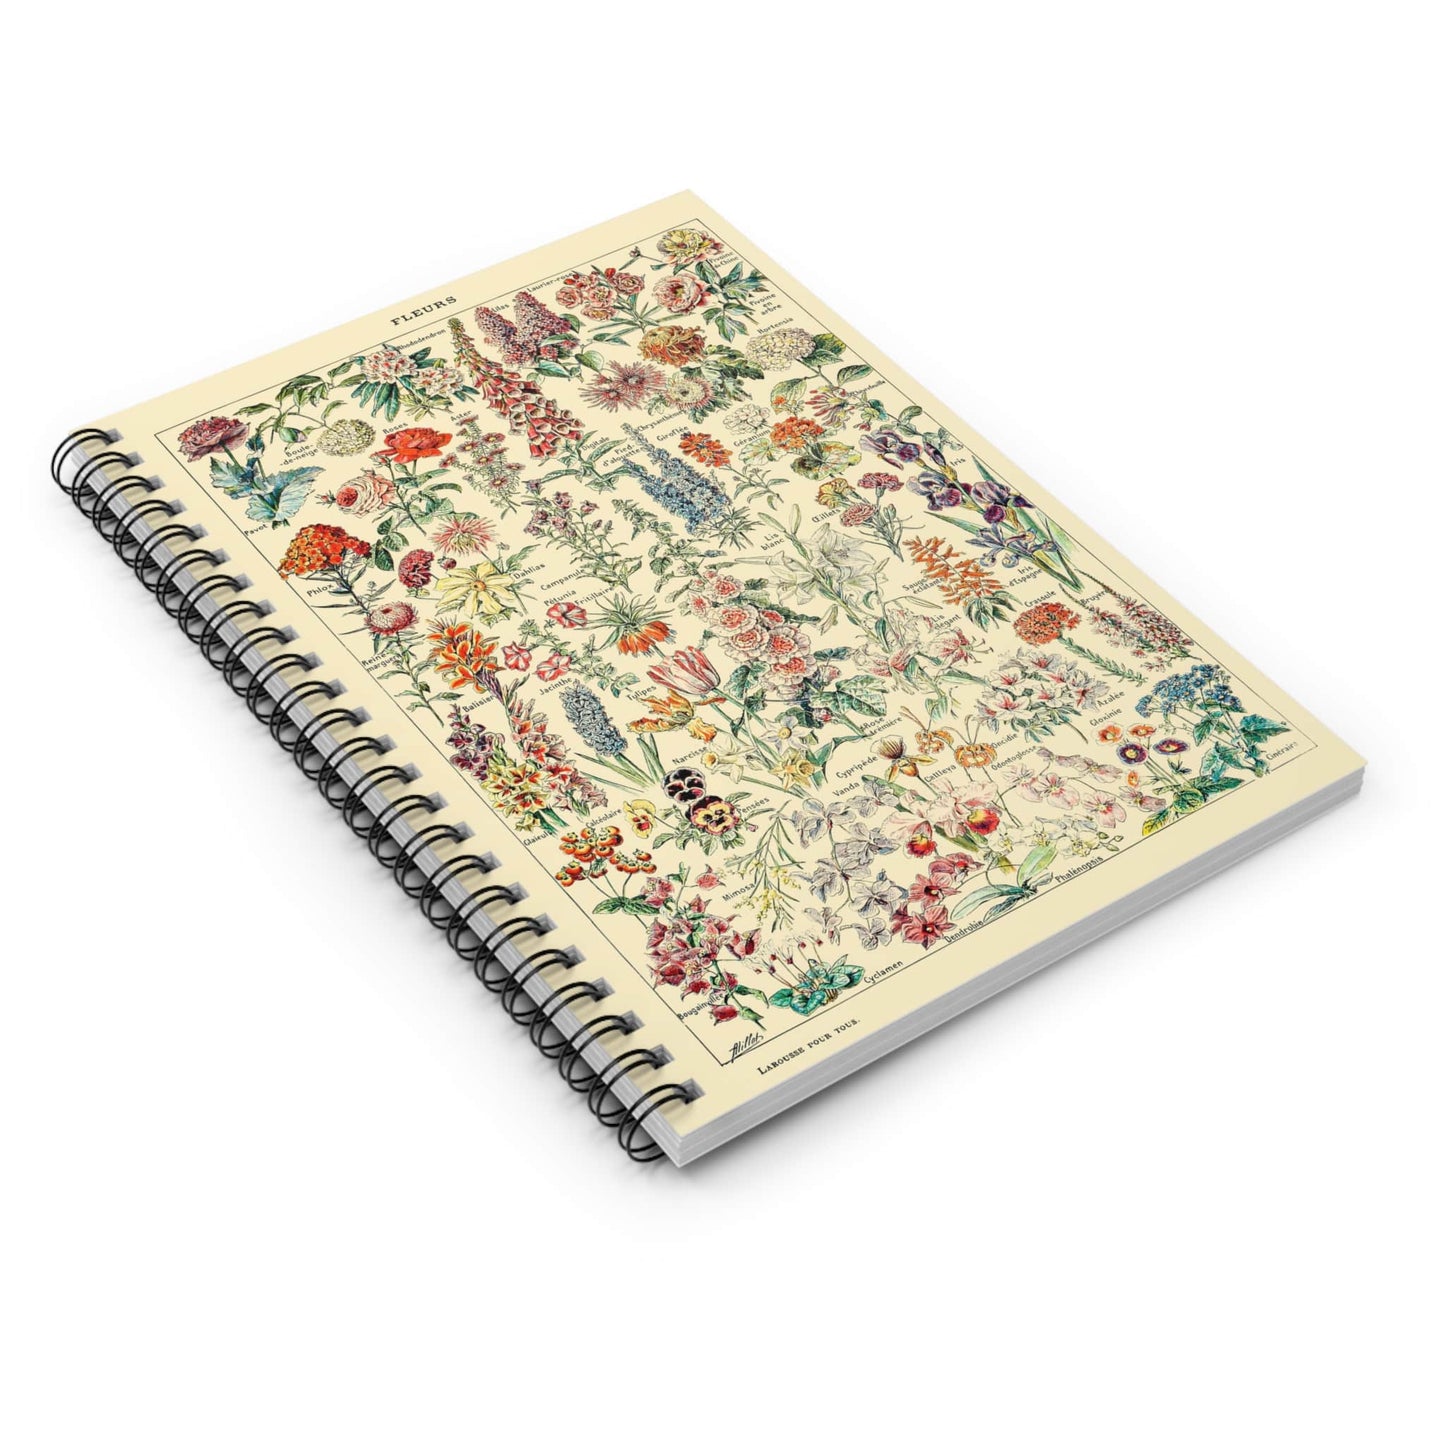 Flower Spiral Notebook Laying Flat on White Surface